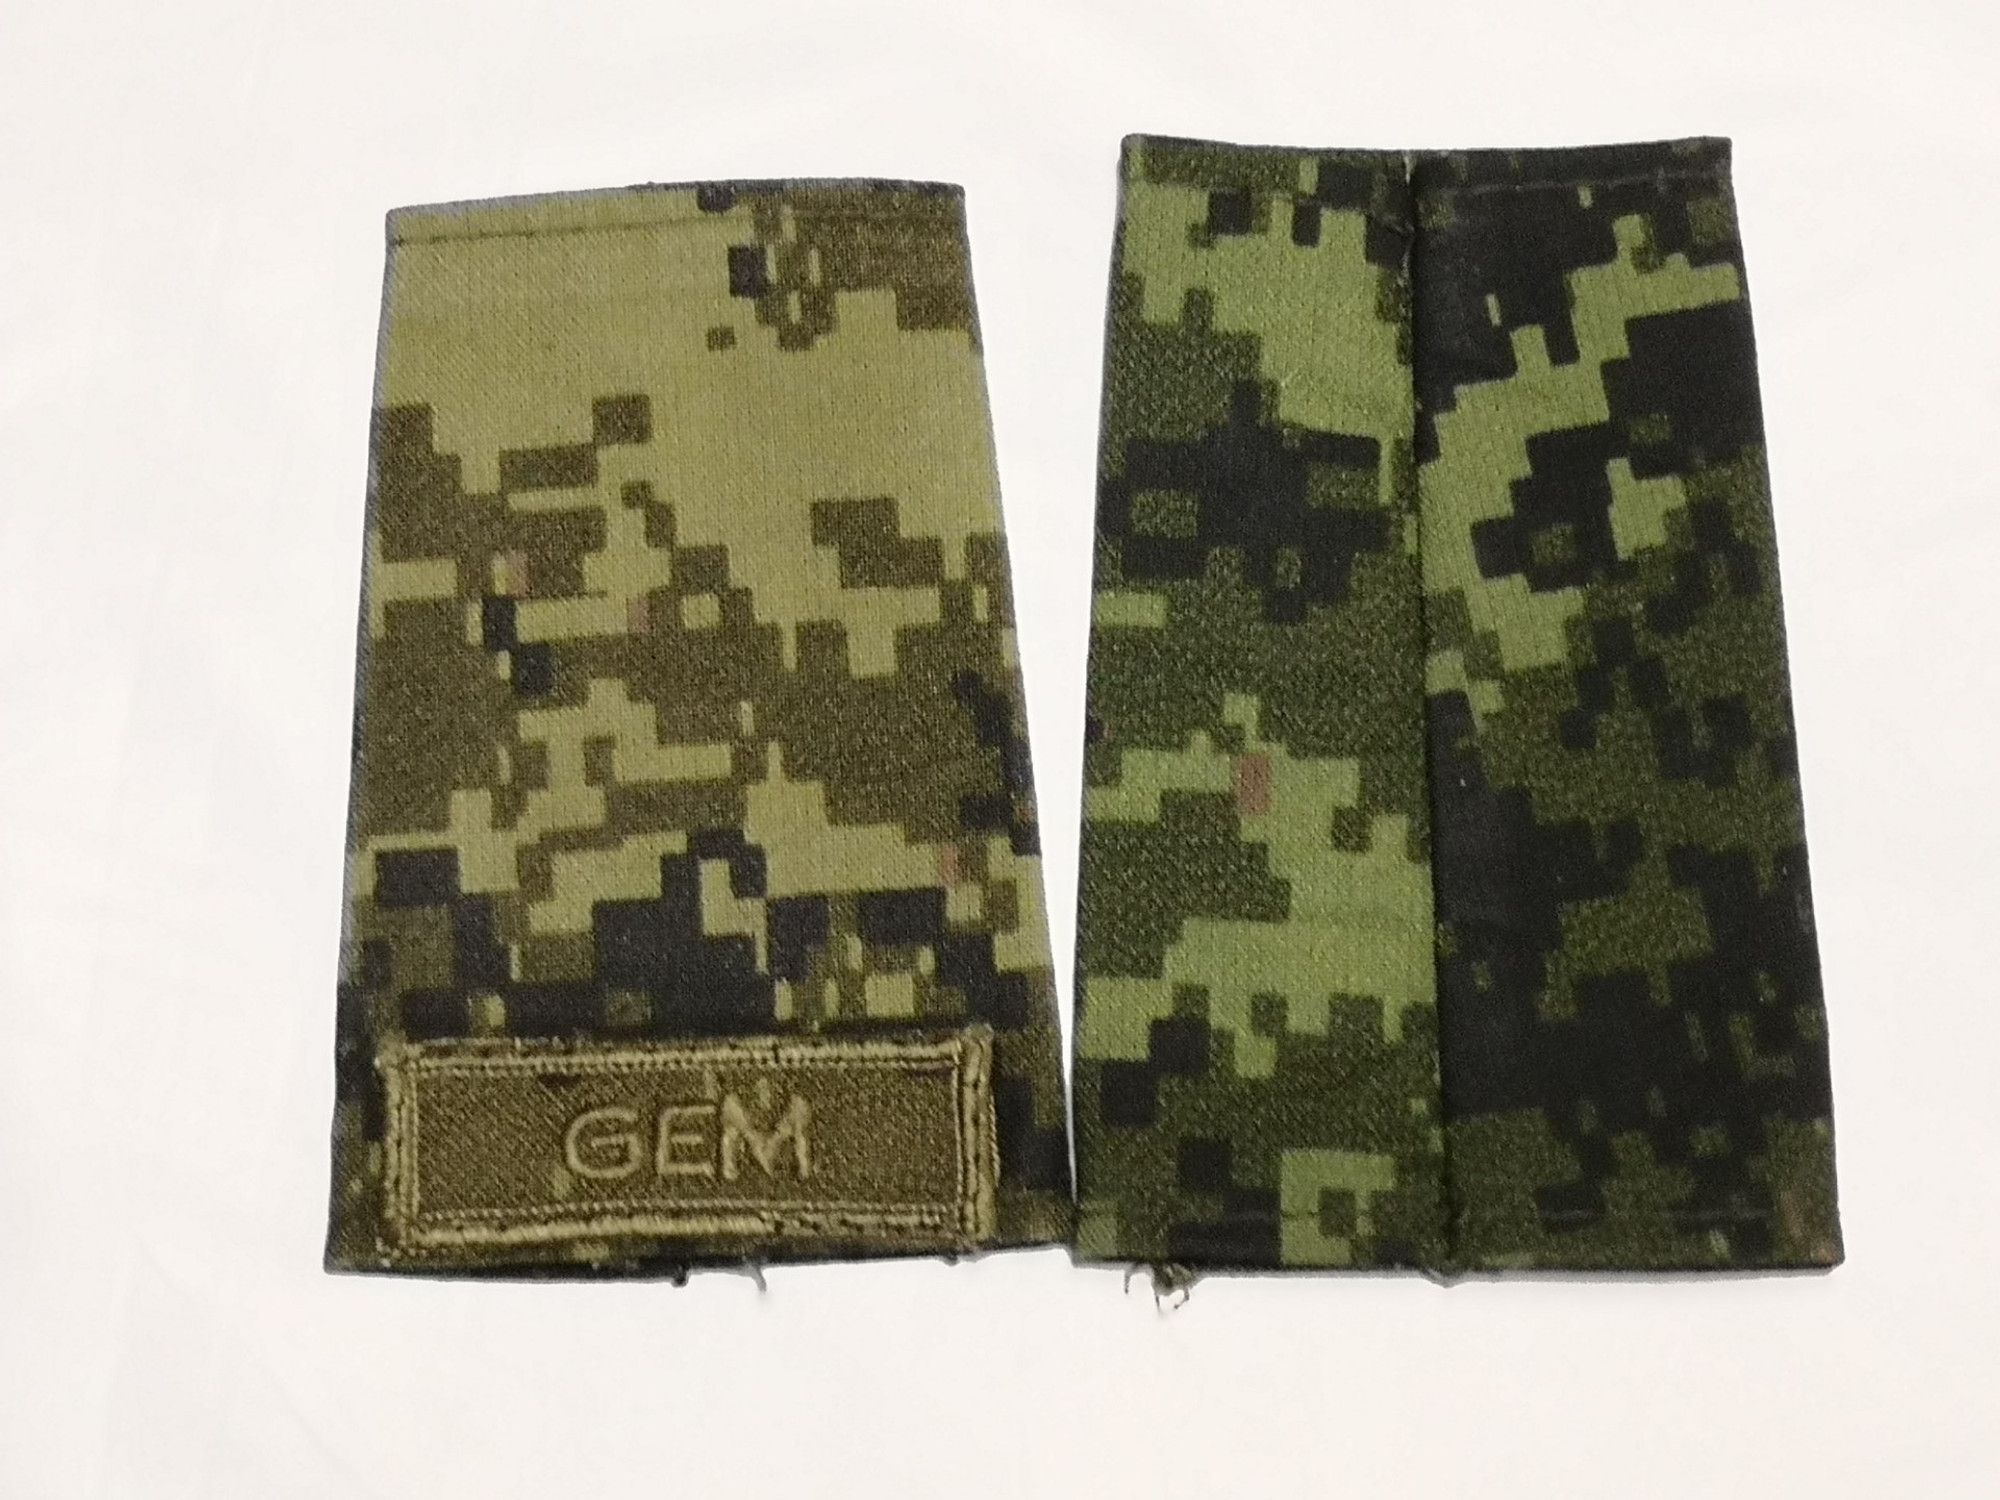 Canadian Armed Forces Cadpat Rank Epaulets GEM - Private (Basic)